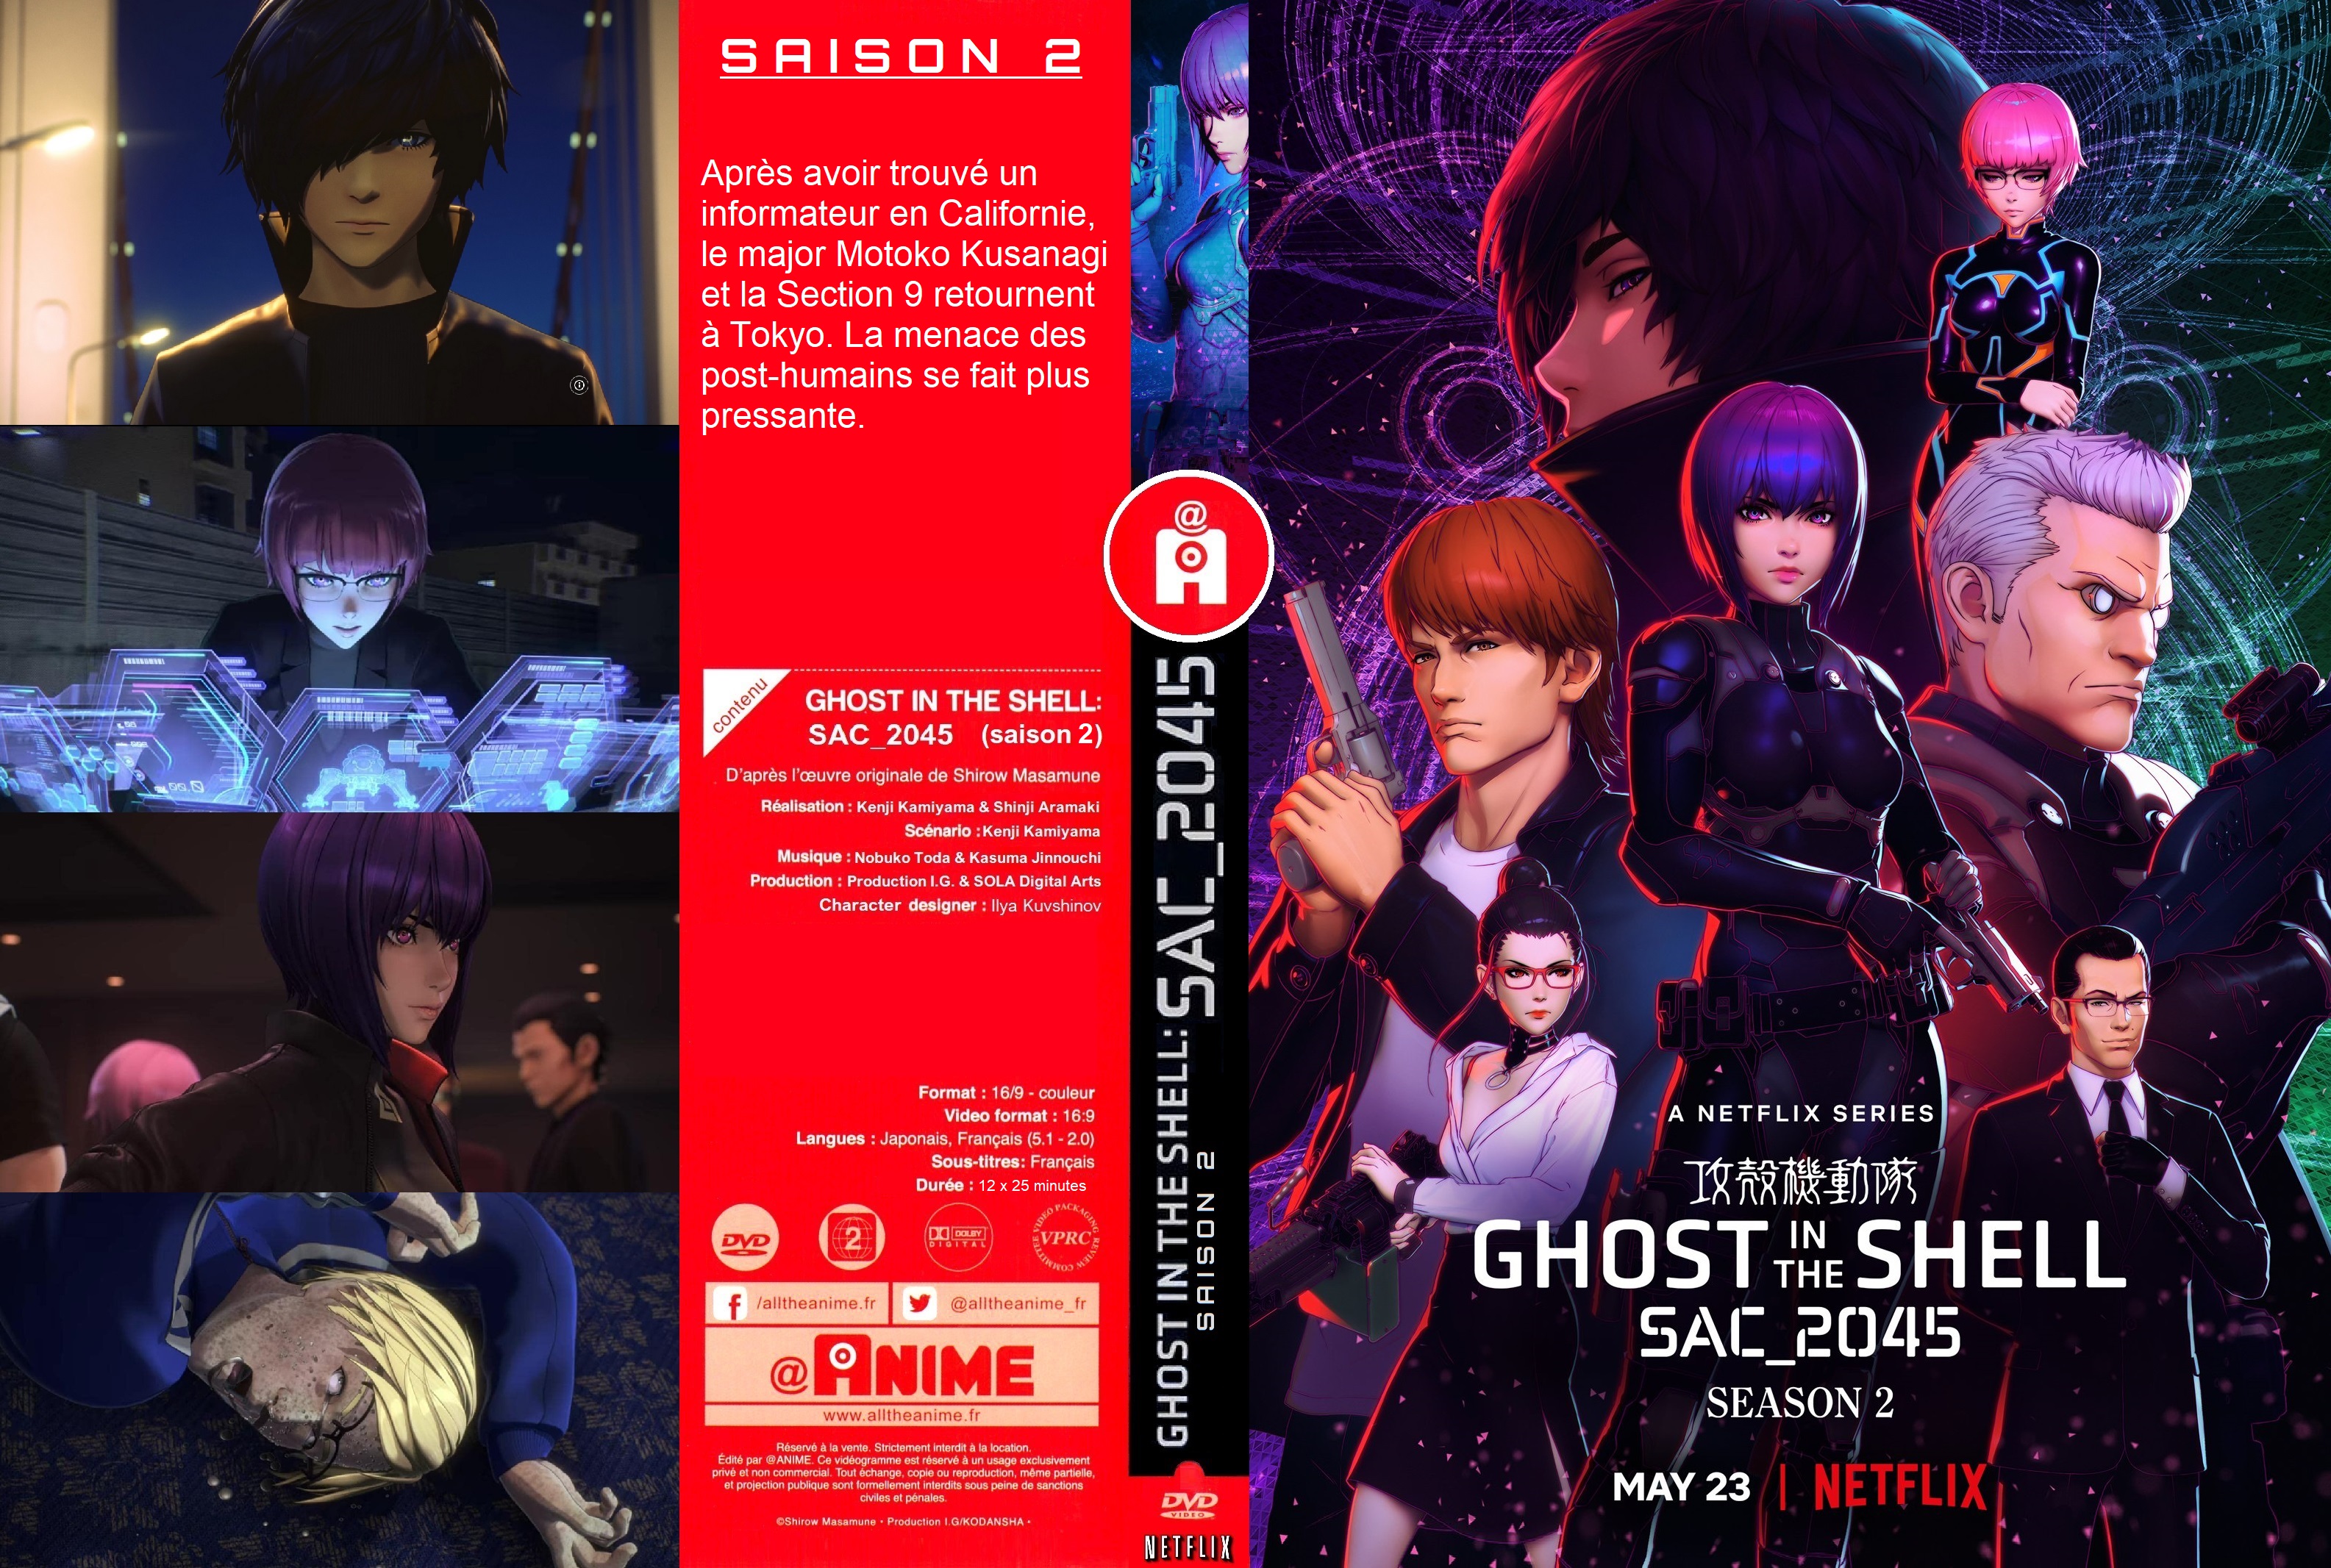 Jaquette DVD Ghost in the Shell SAC 2045 saison 2 custom